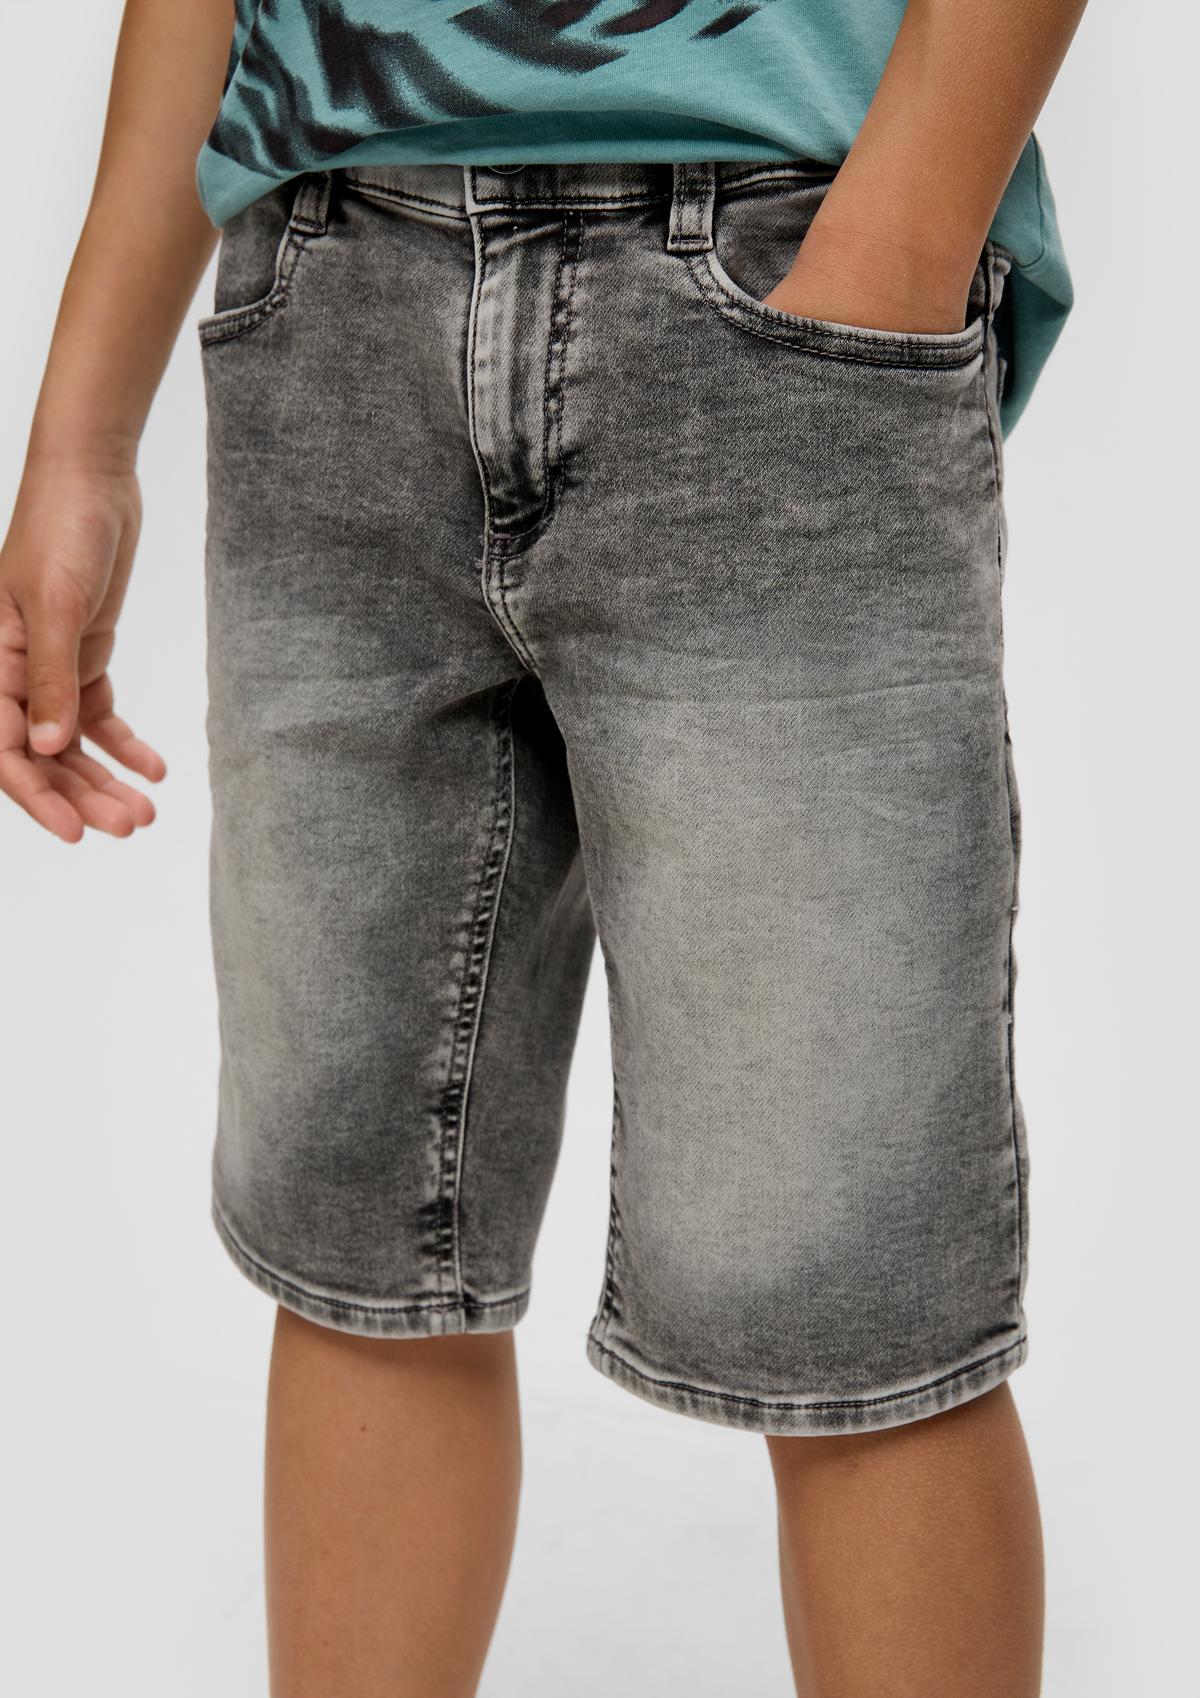 s.Oliver Seattle: Denim Bermudas with contrasting stitching